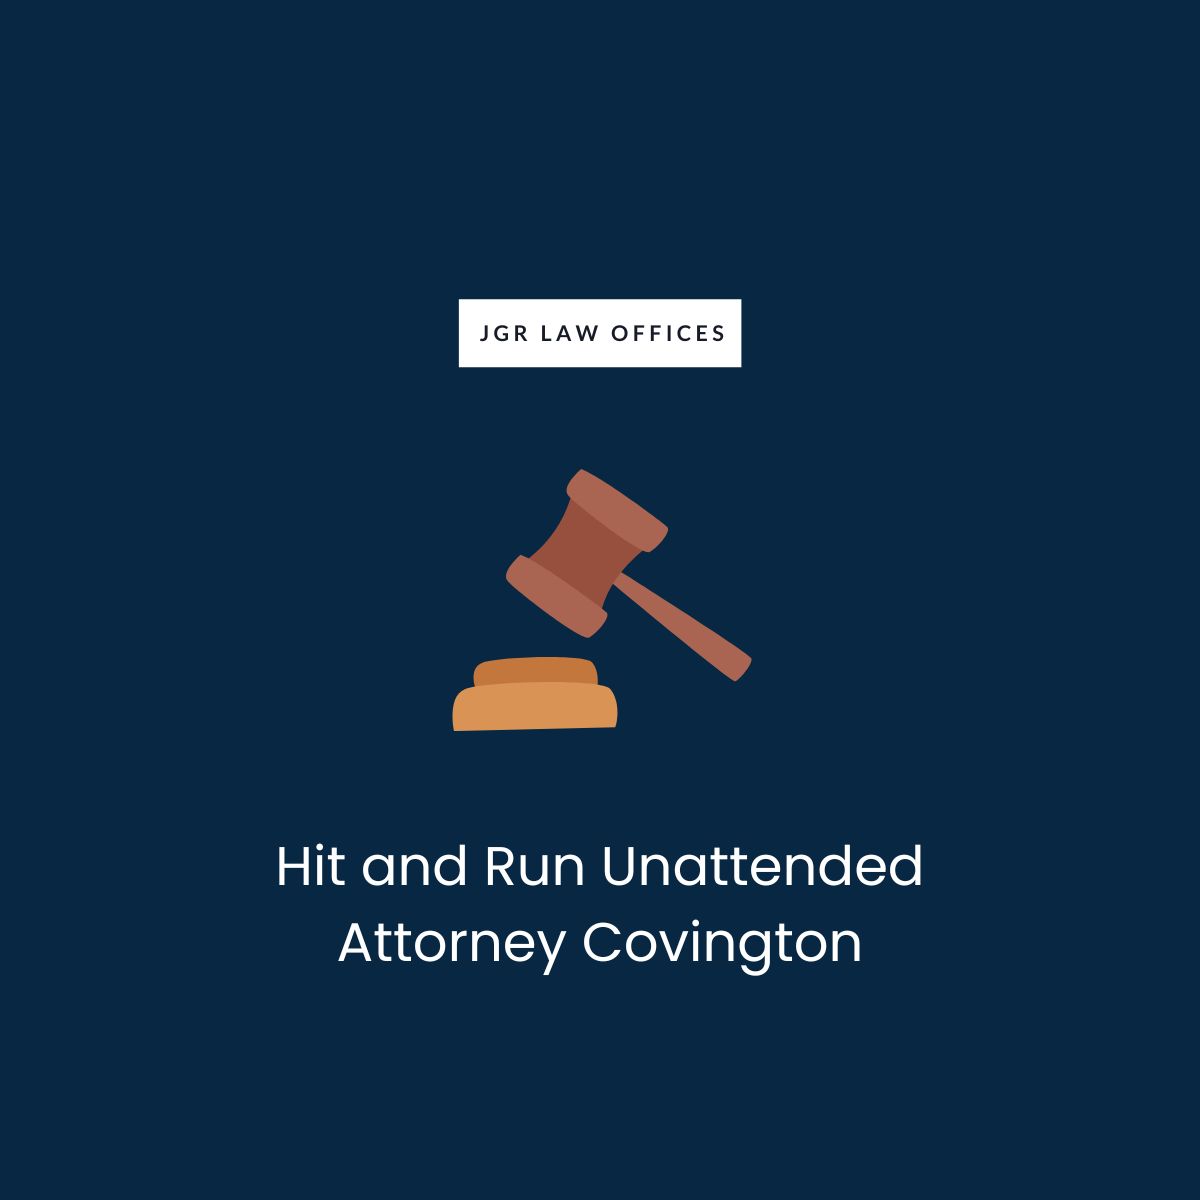 Hit and Run Unattended Attorney Covington